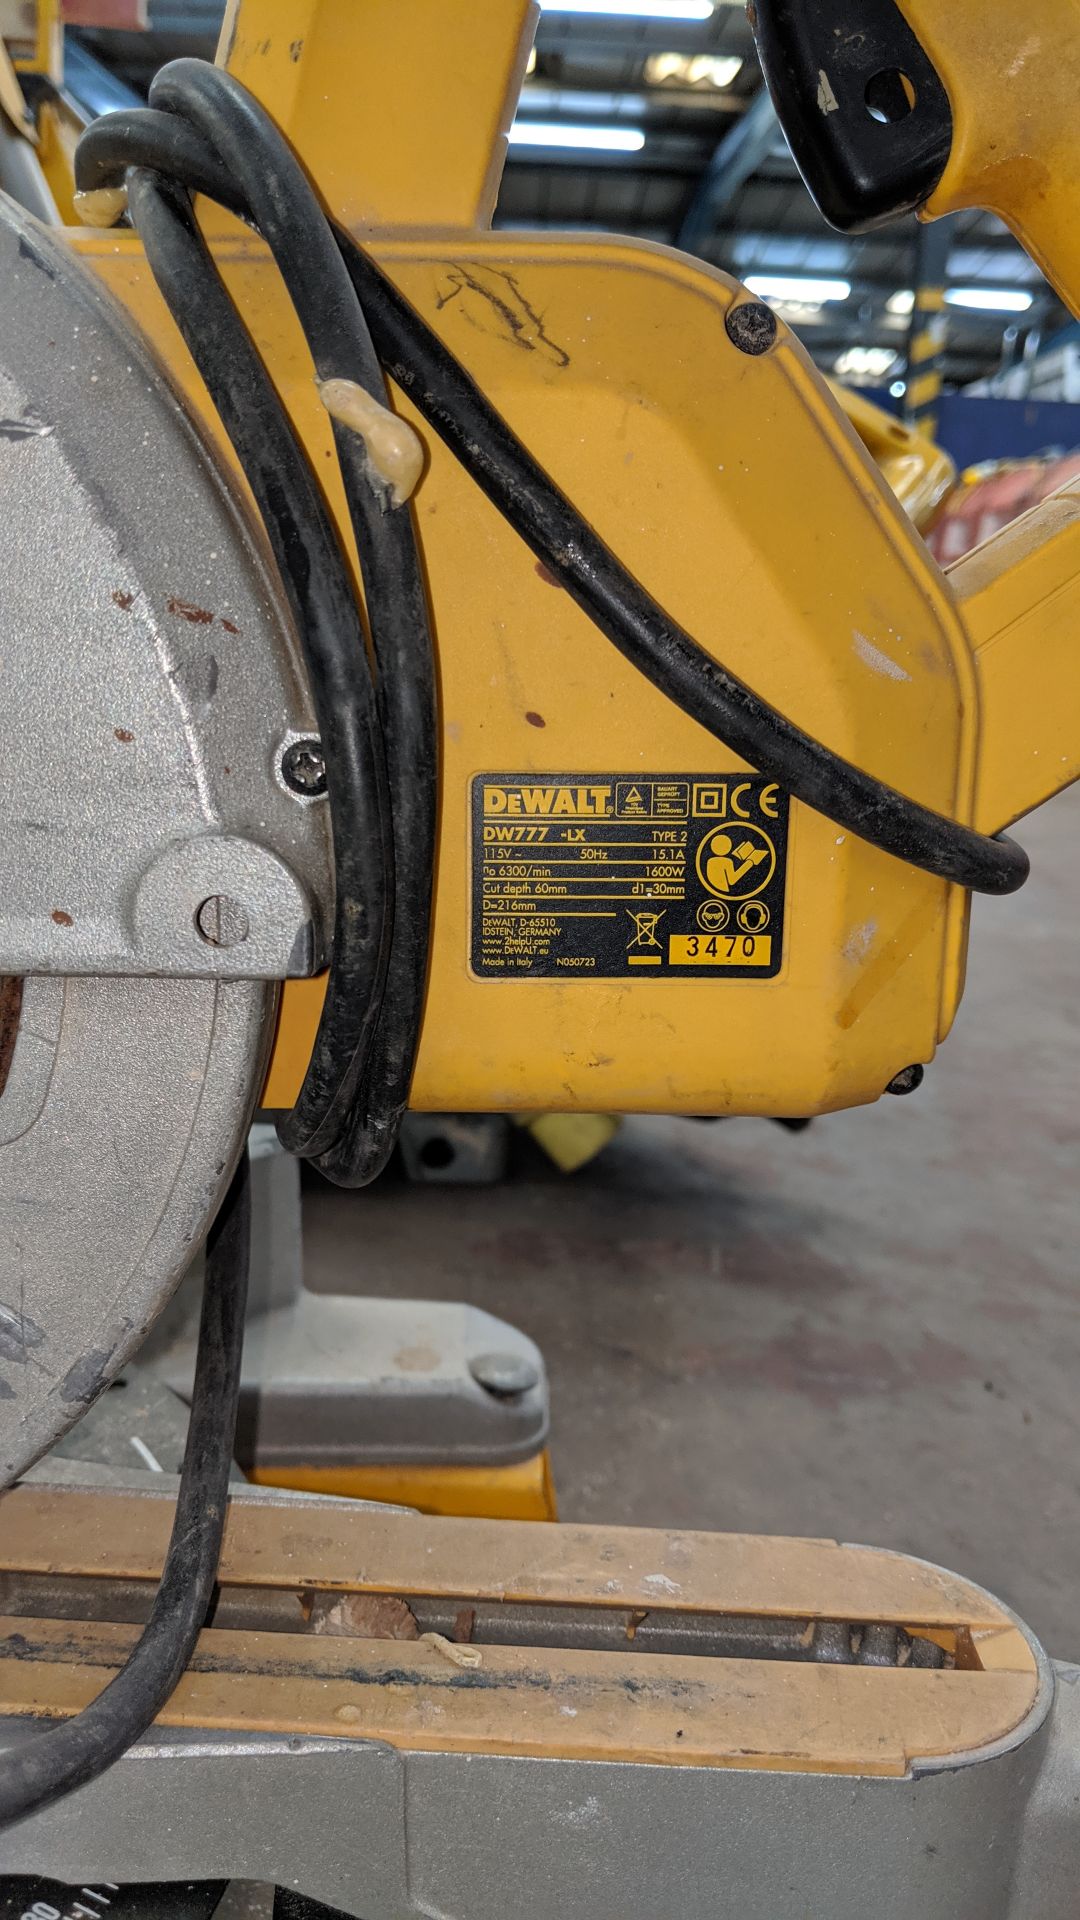 DeWalt 110V DW777-LX mitre saw IMPORTANT: Please remember goods successfully bid upon must be paid - Image 4 of 4